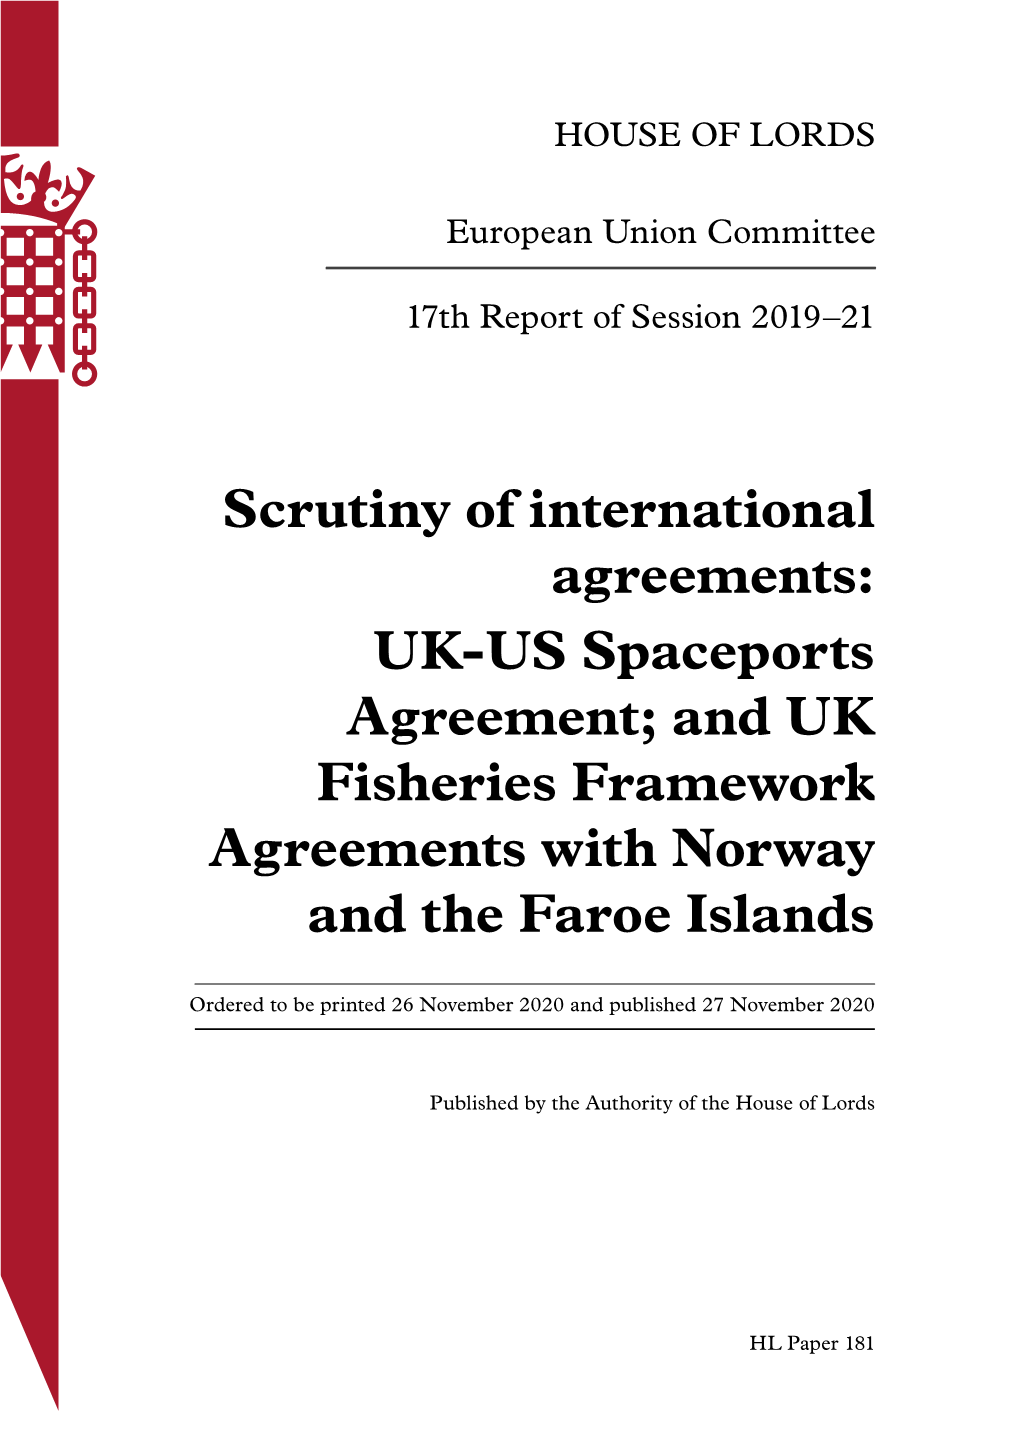 UK-US Spaceports Agreement; and UK Fisheries Framework Agreements with Norway and the Faroe Islands